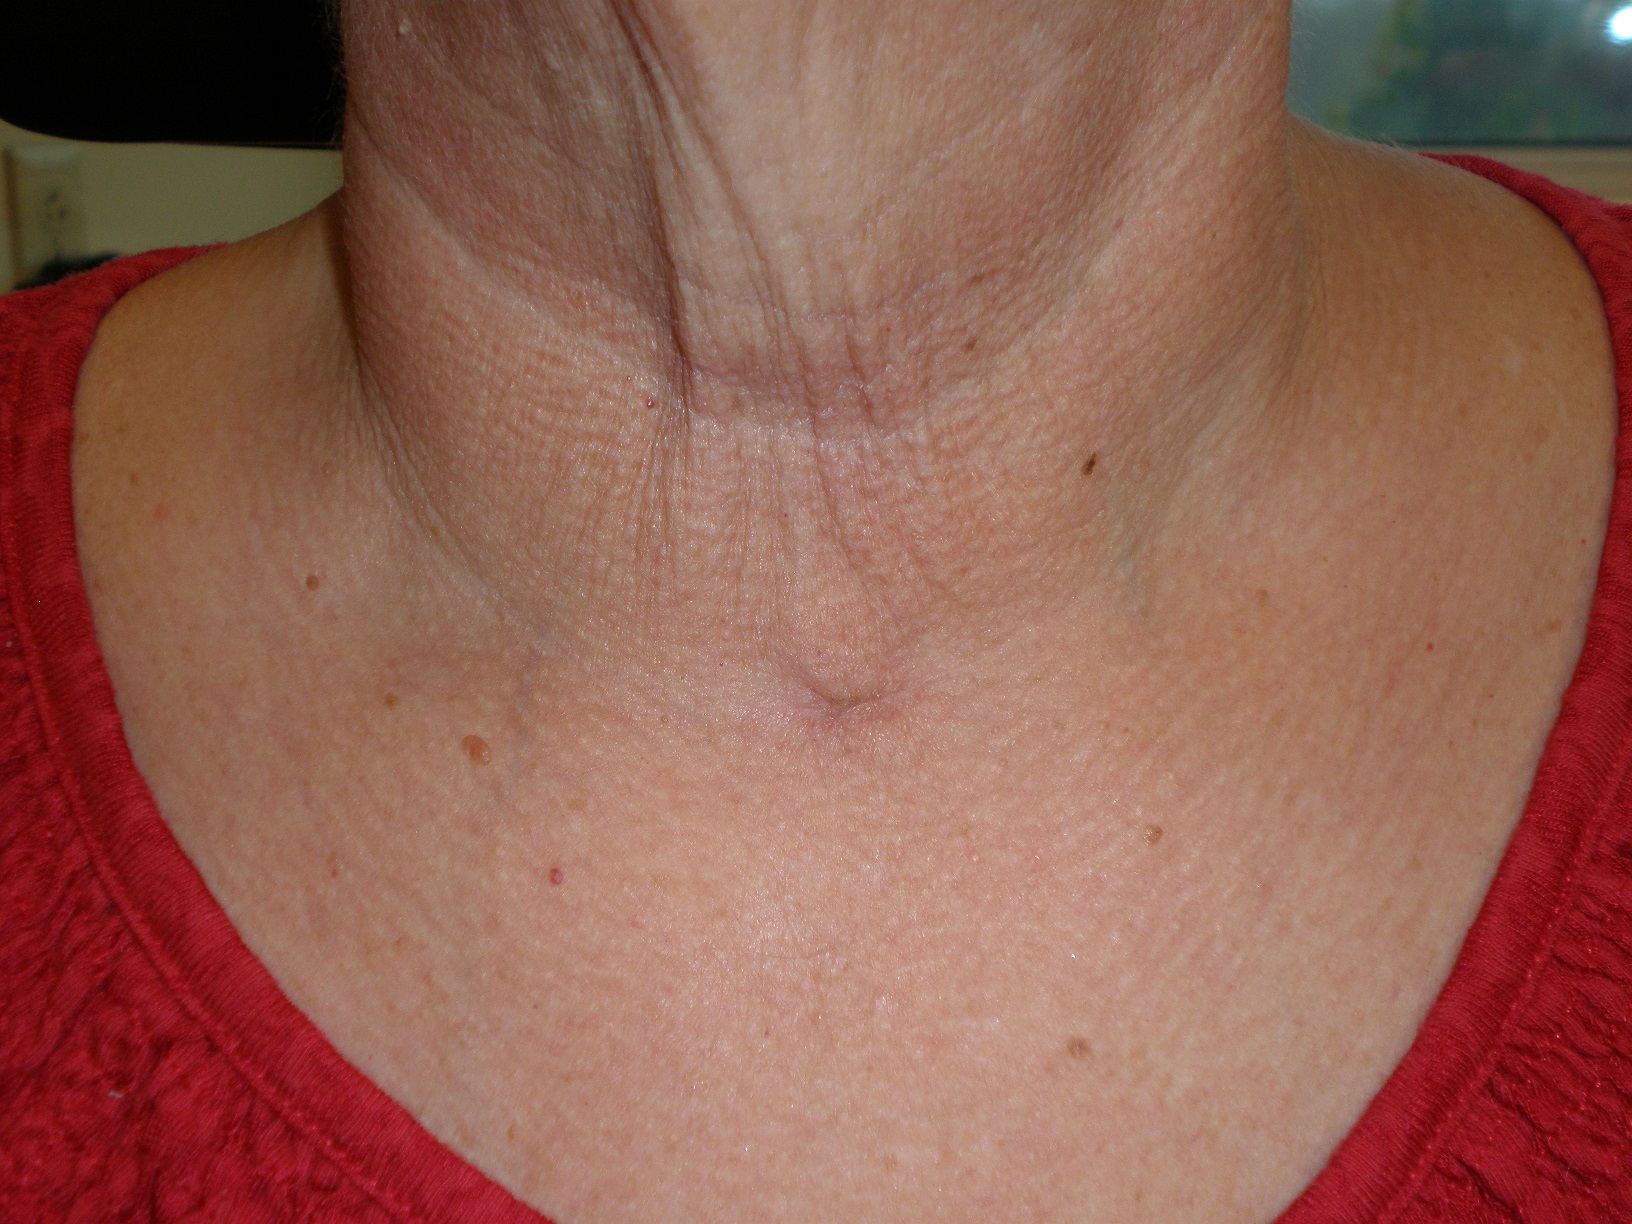 thyroidectomy incision total minimally invasive thyroid parathyroidectomy healed after steven welcome dr surgery advanced parathyroid center ent announces creation healing